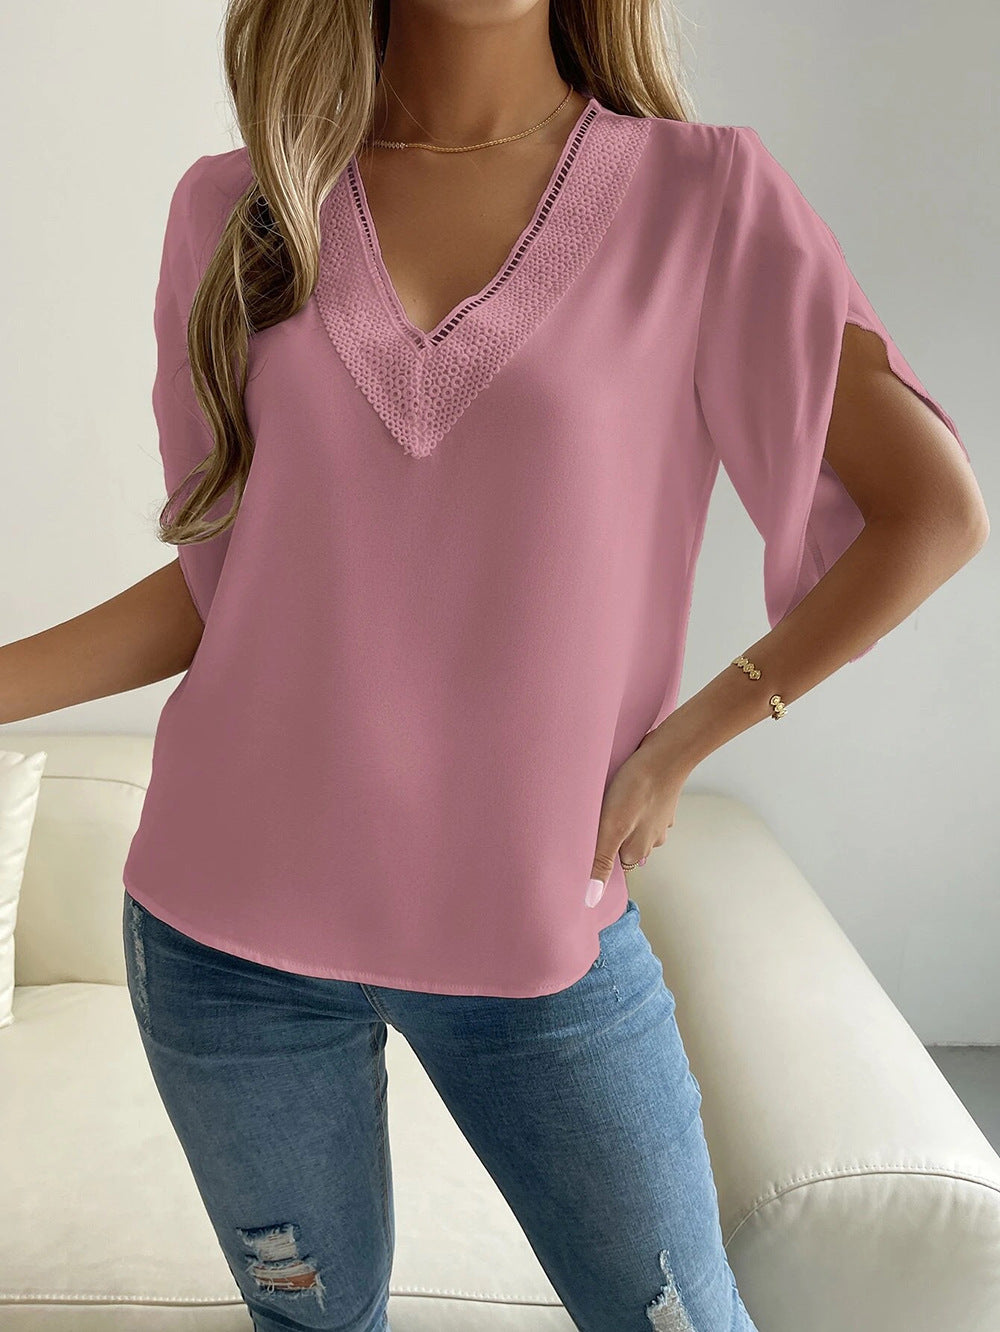 V neck Lace Solid Color Top Short Sleeve Chiffon Shirt